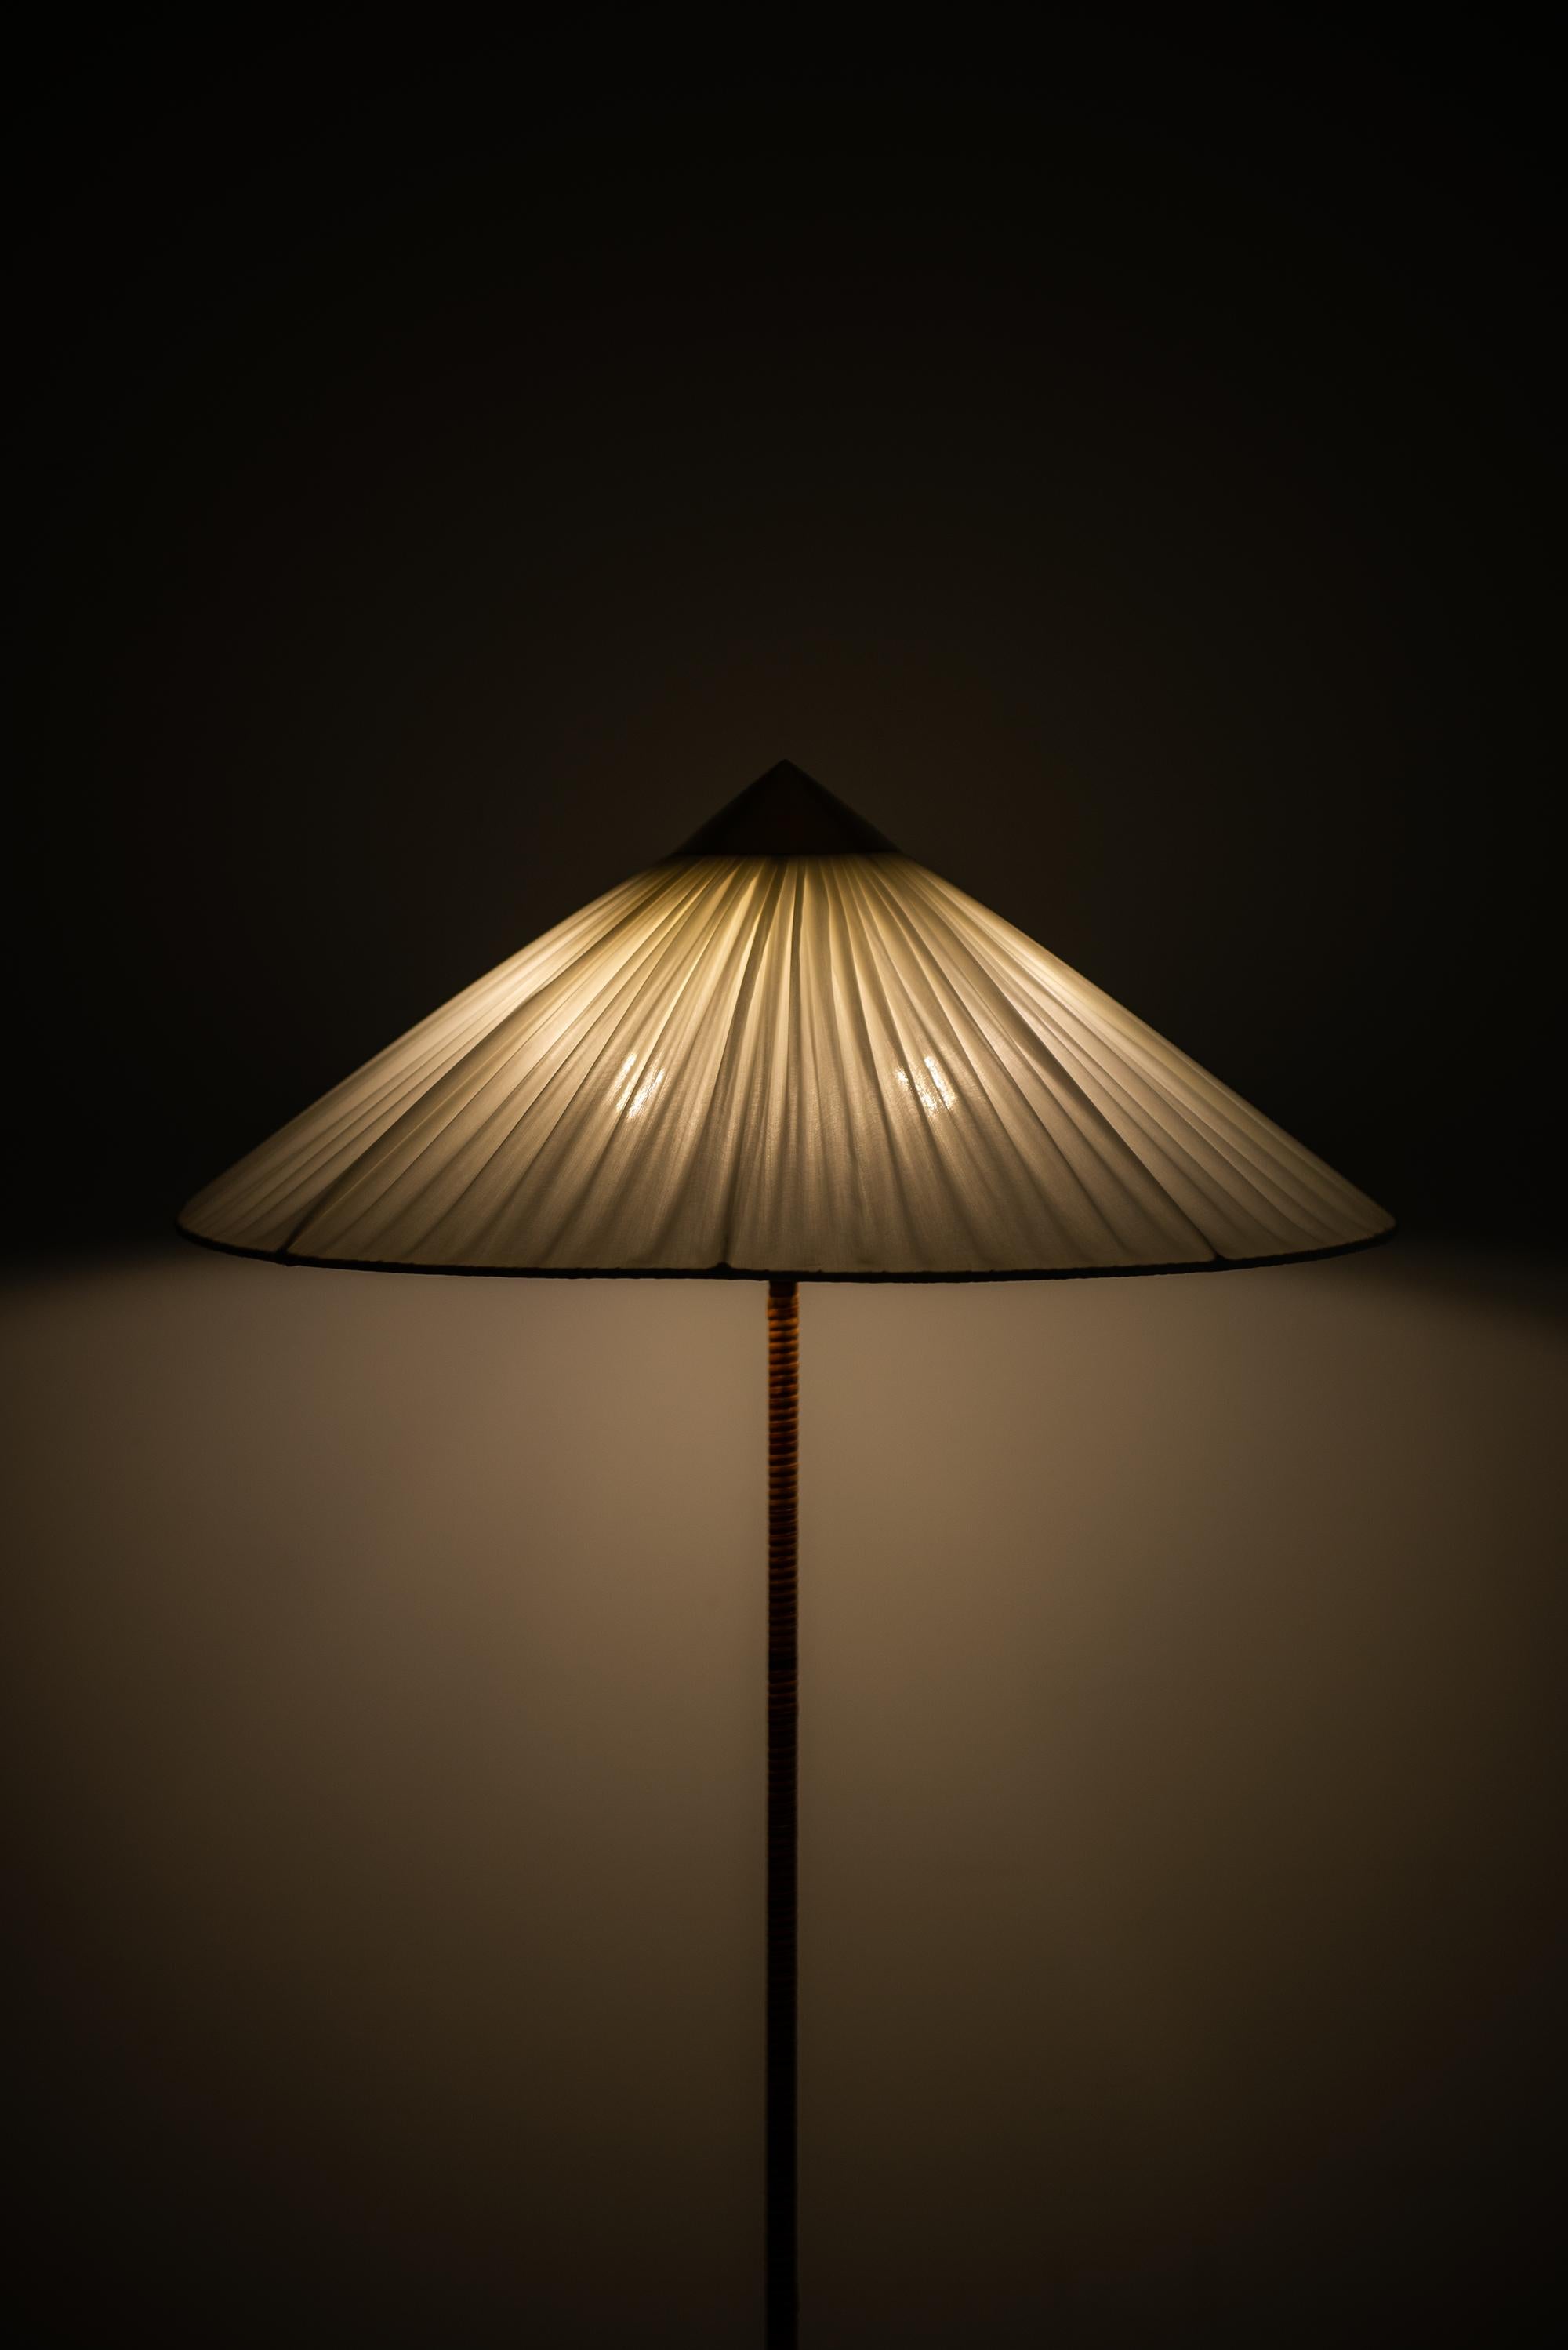 Mid-20th Century Paavo Tynell Floor Lamps Model 9602 / Chinese Hat by Taito Oy in Finland